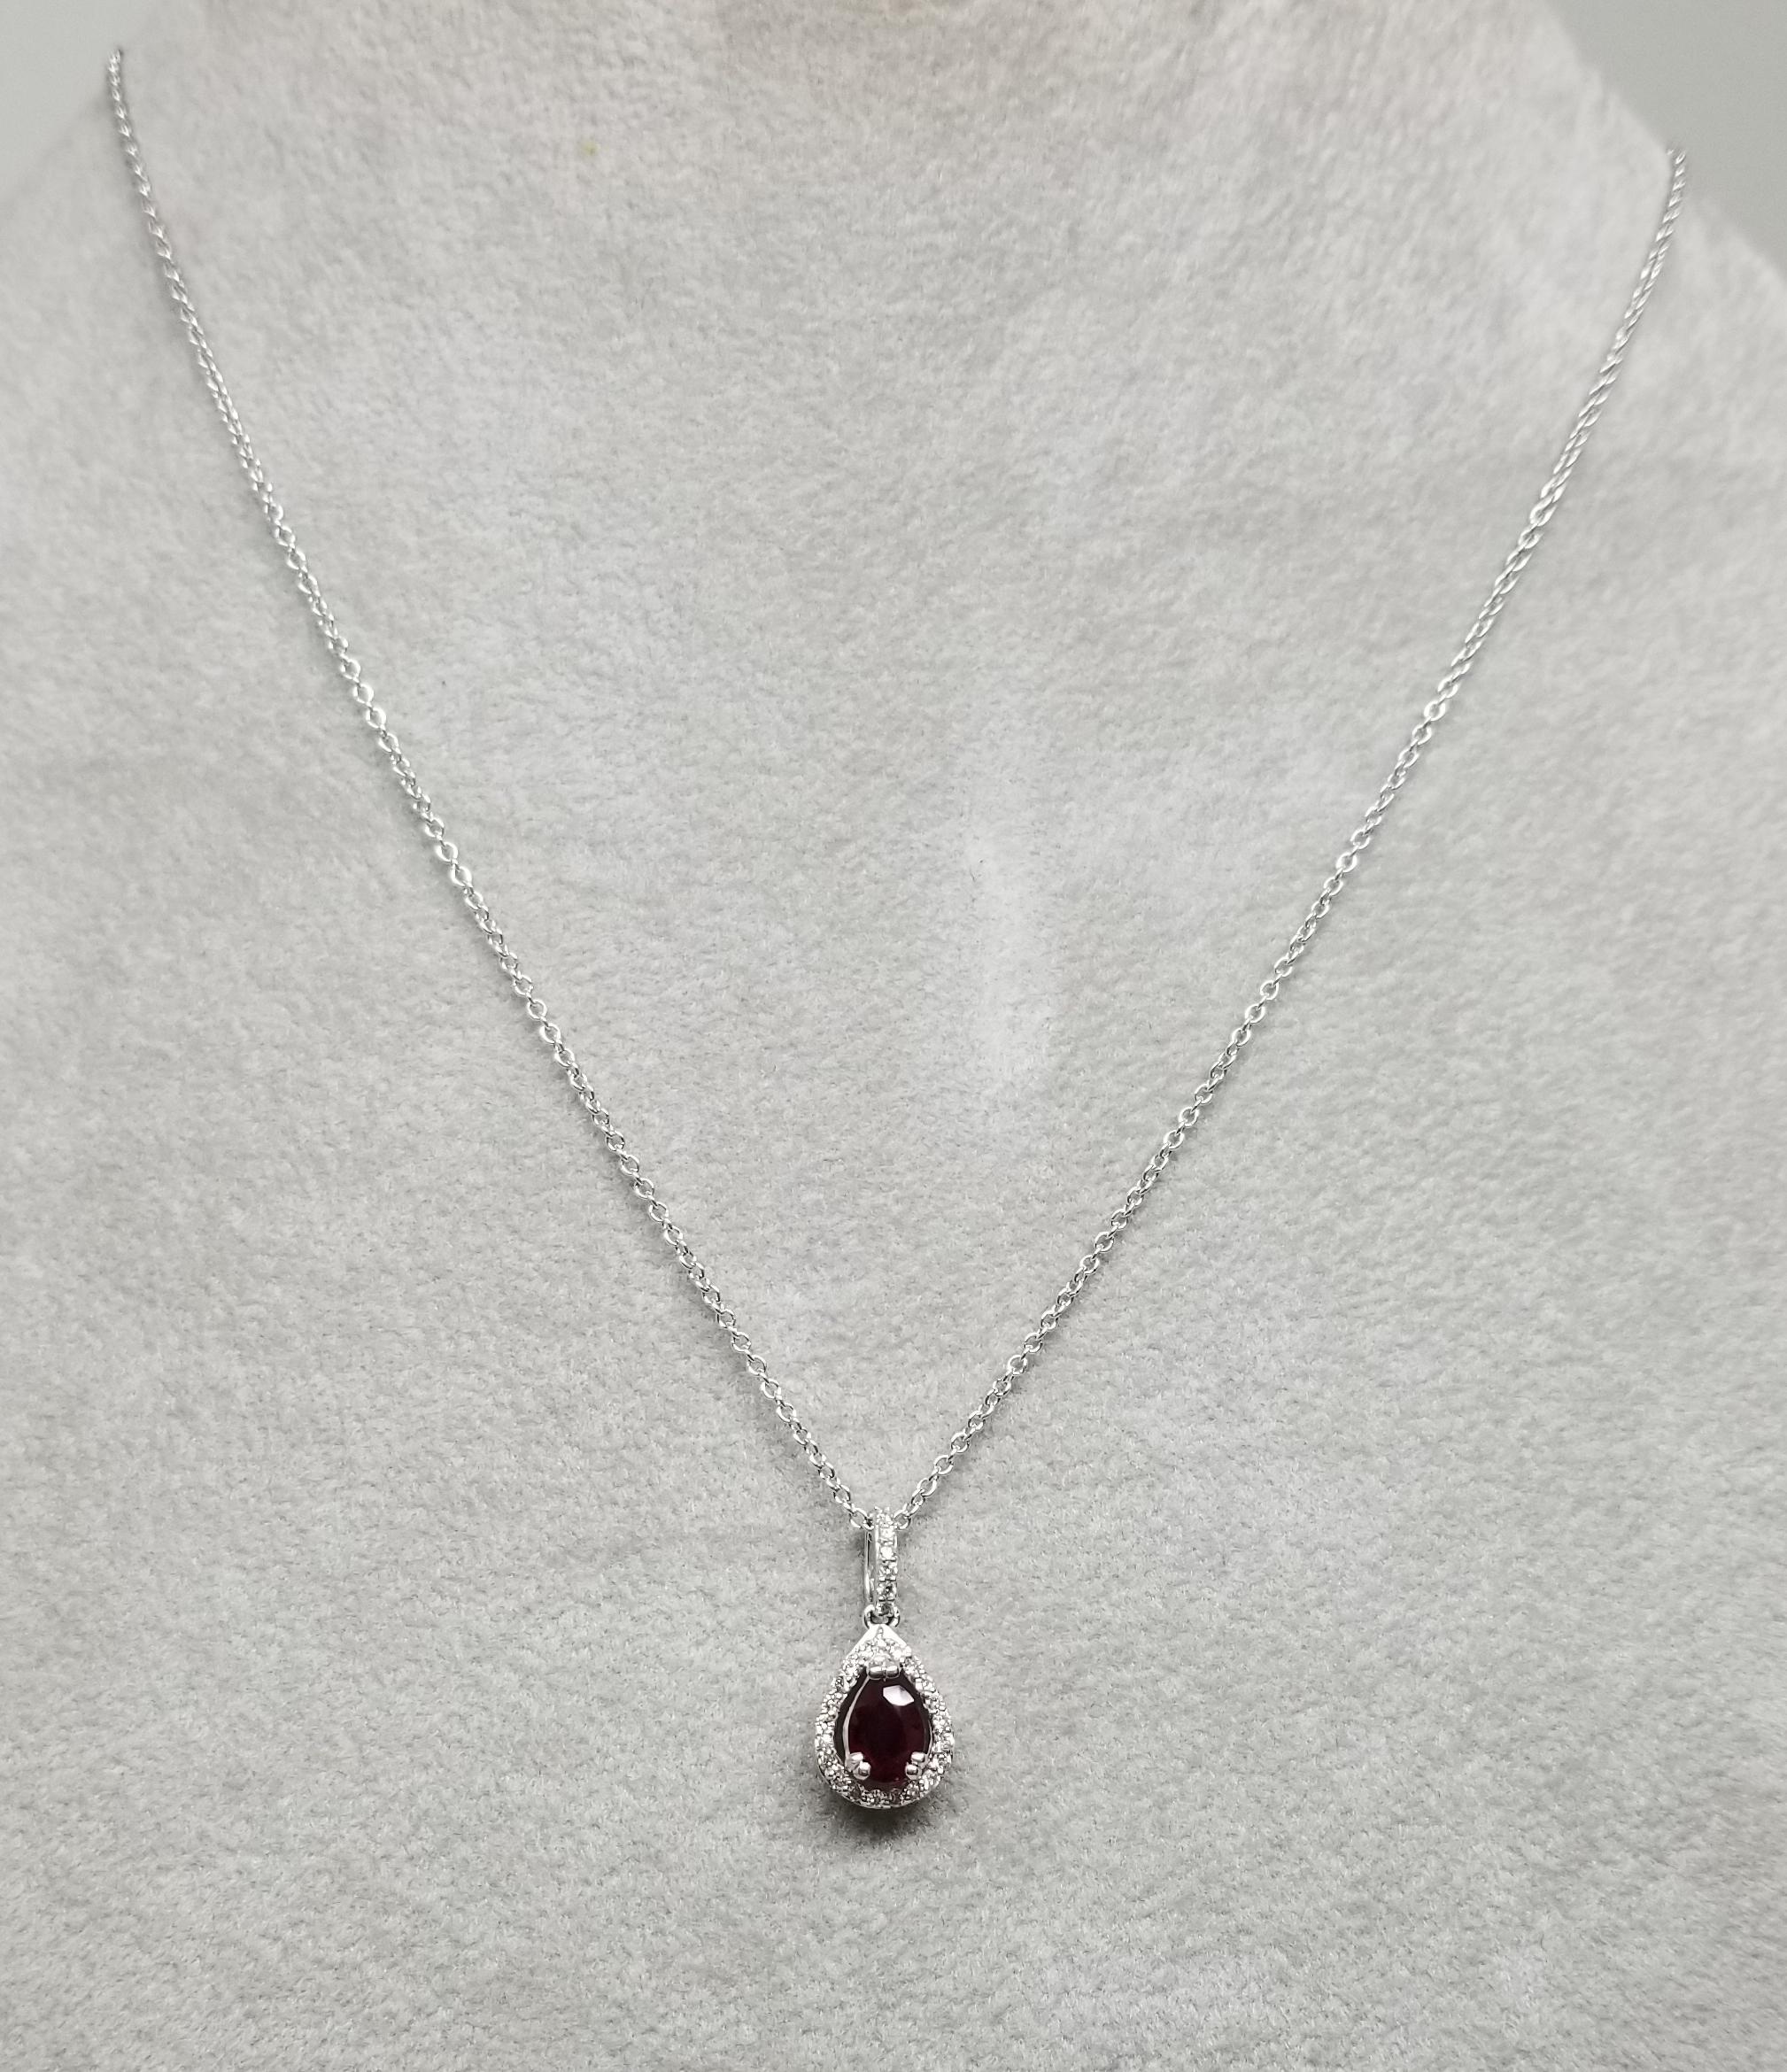 14 karat Ruby and diamond halo pendant, containing 1 pear shape ruby of gem quality weighing .65cts. and 930 round full cut diamonds of very fine quality weighing .20pts.